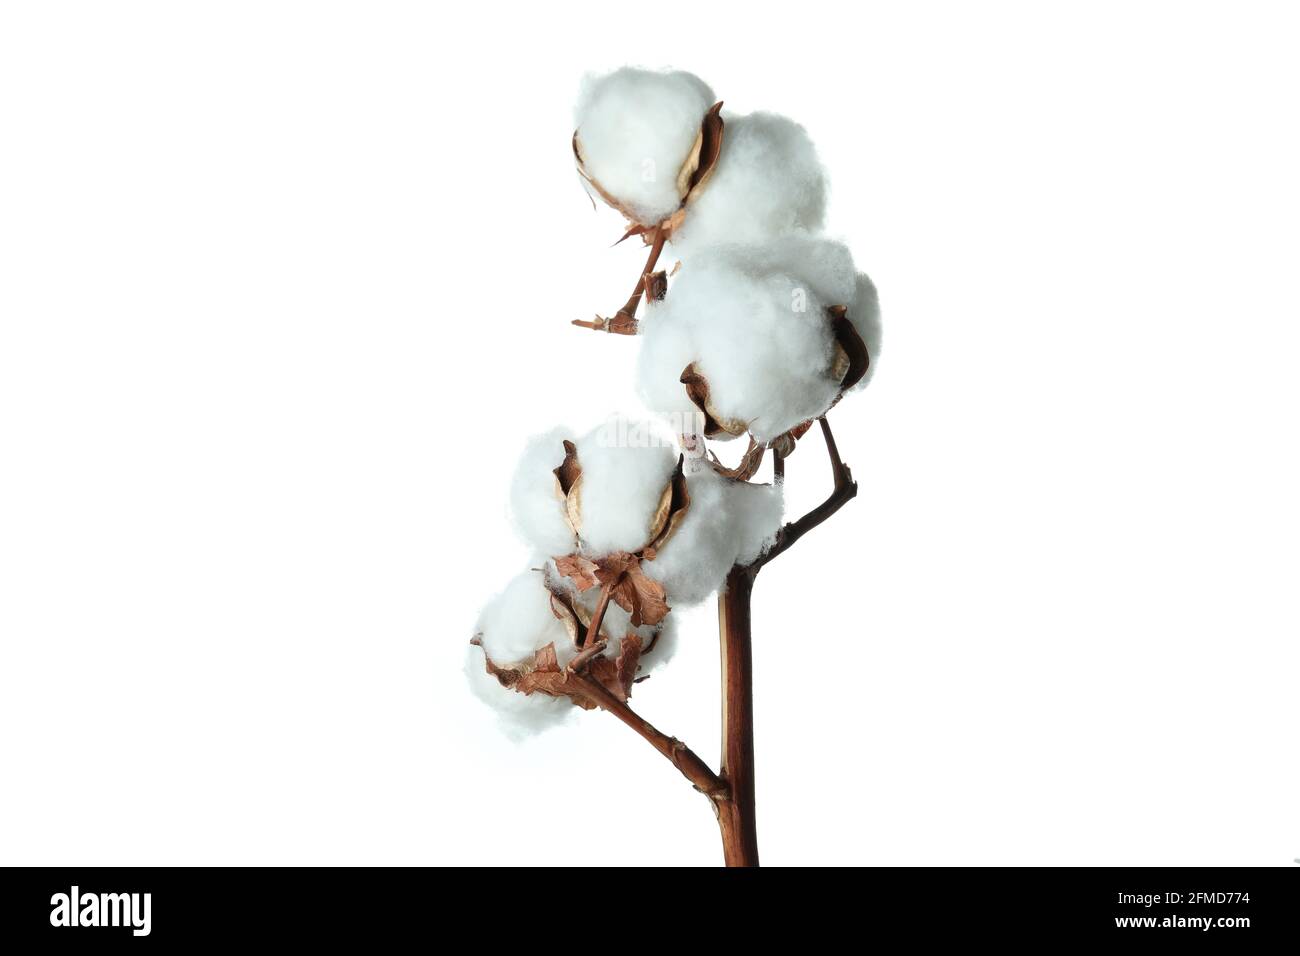 Cotton plant branch isolated on white background Stock Photo